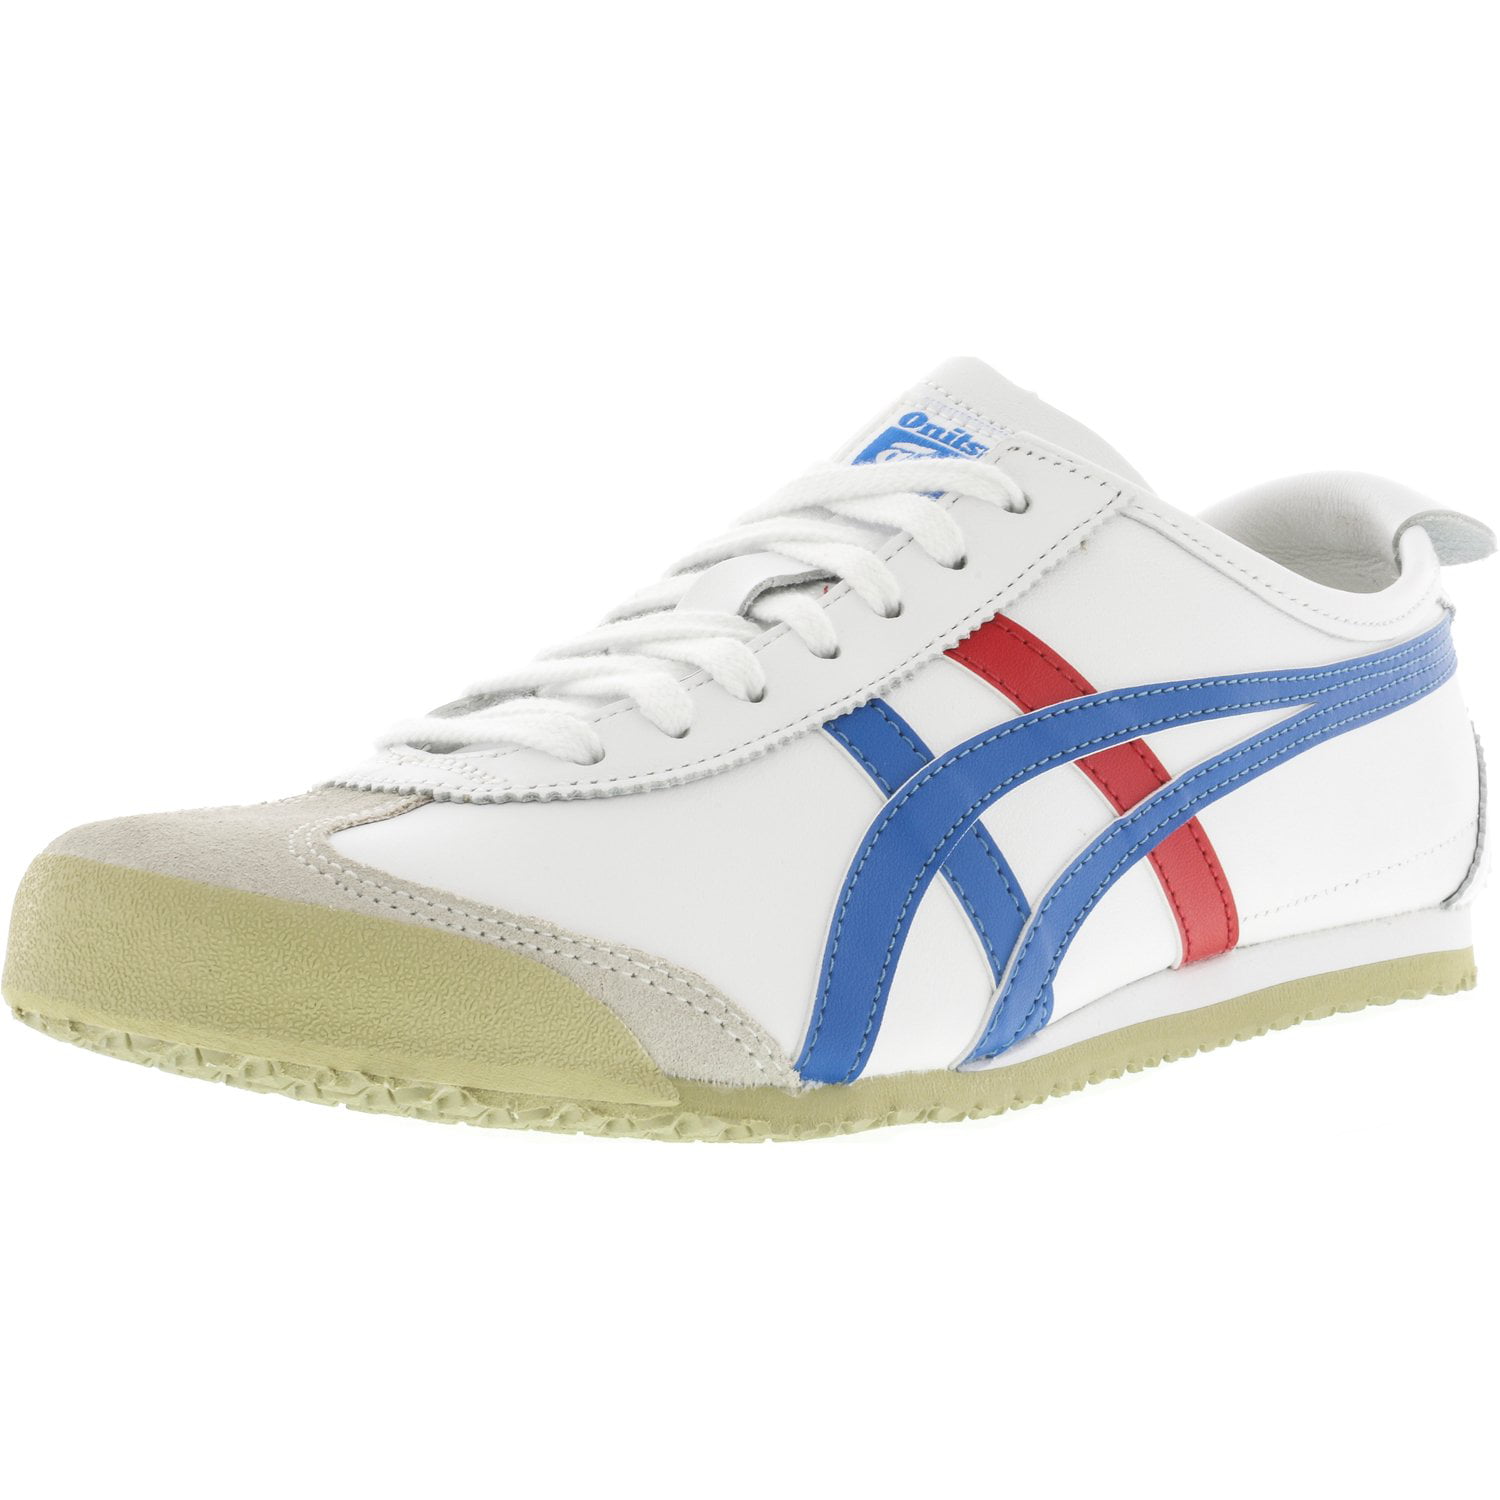 Onitsuka Tiger Mexico 66 White / Blue Ankle-High Leather Fashion ...